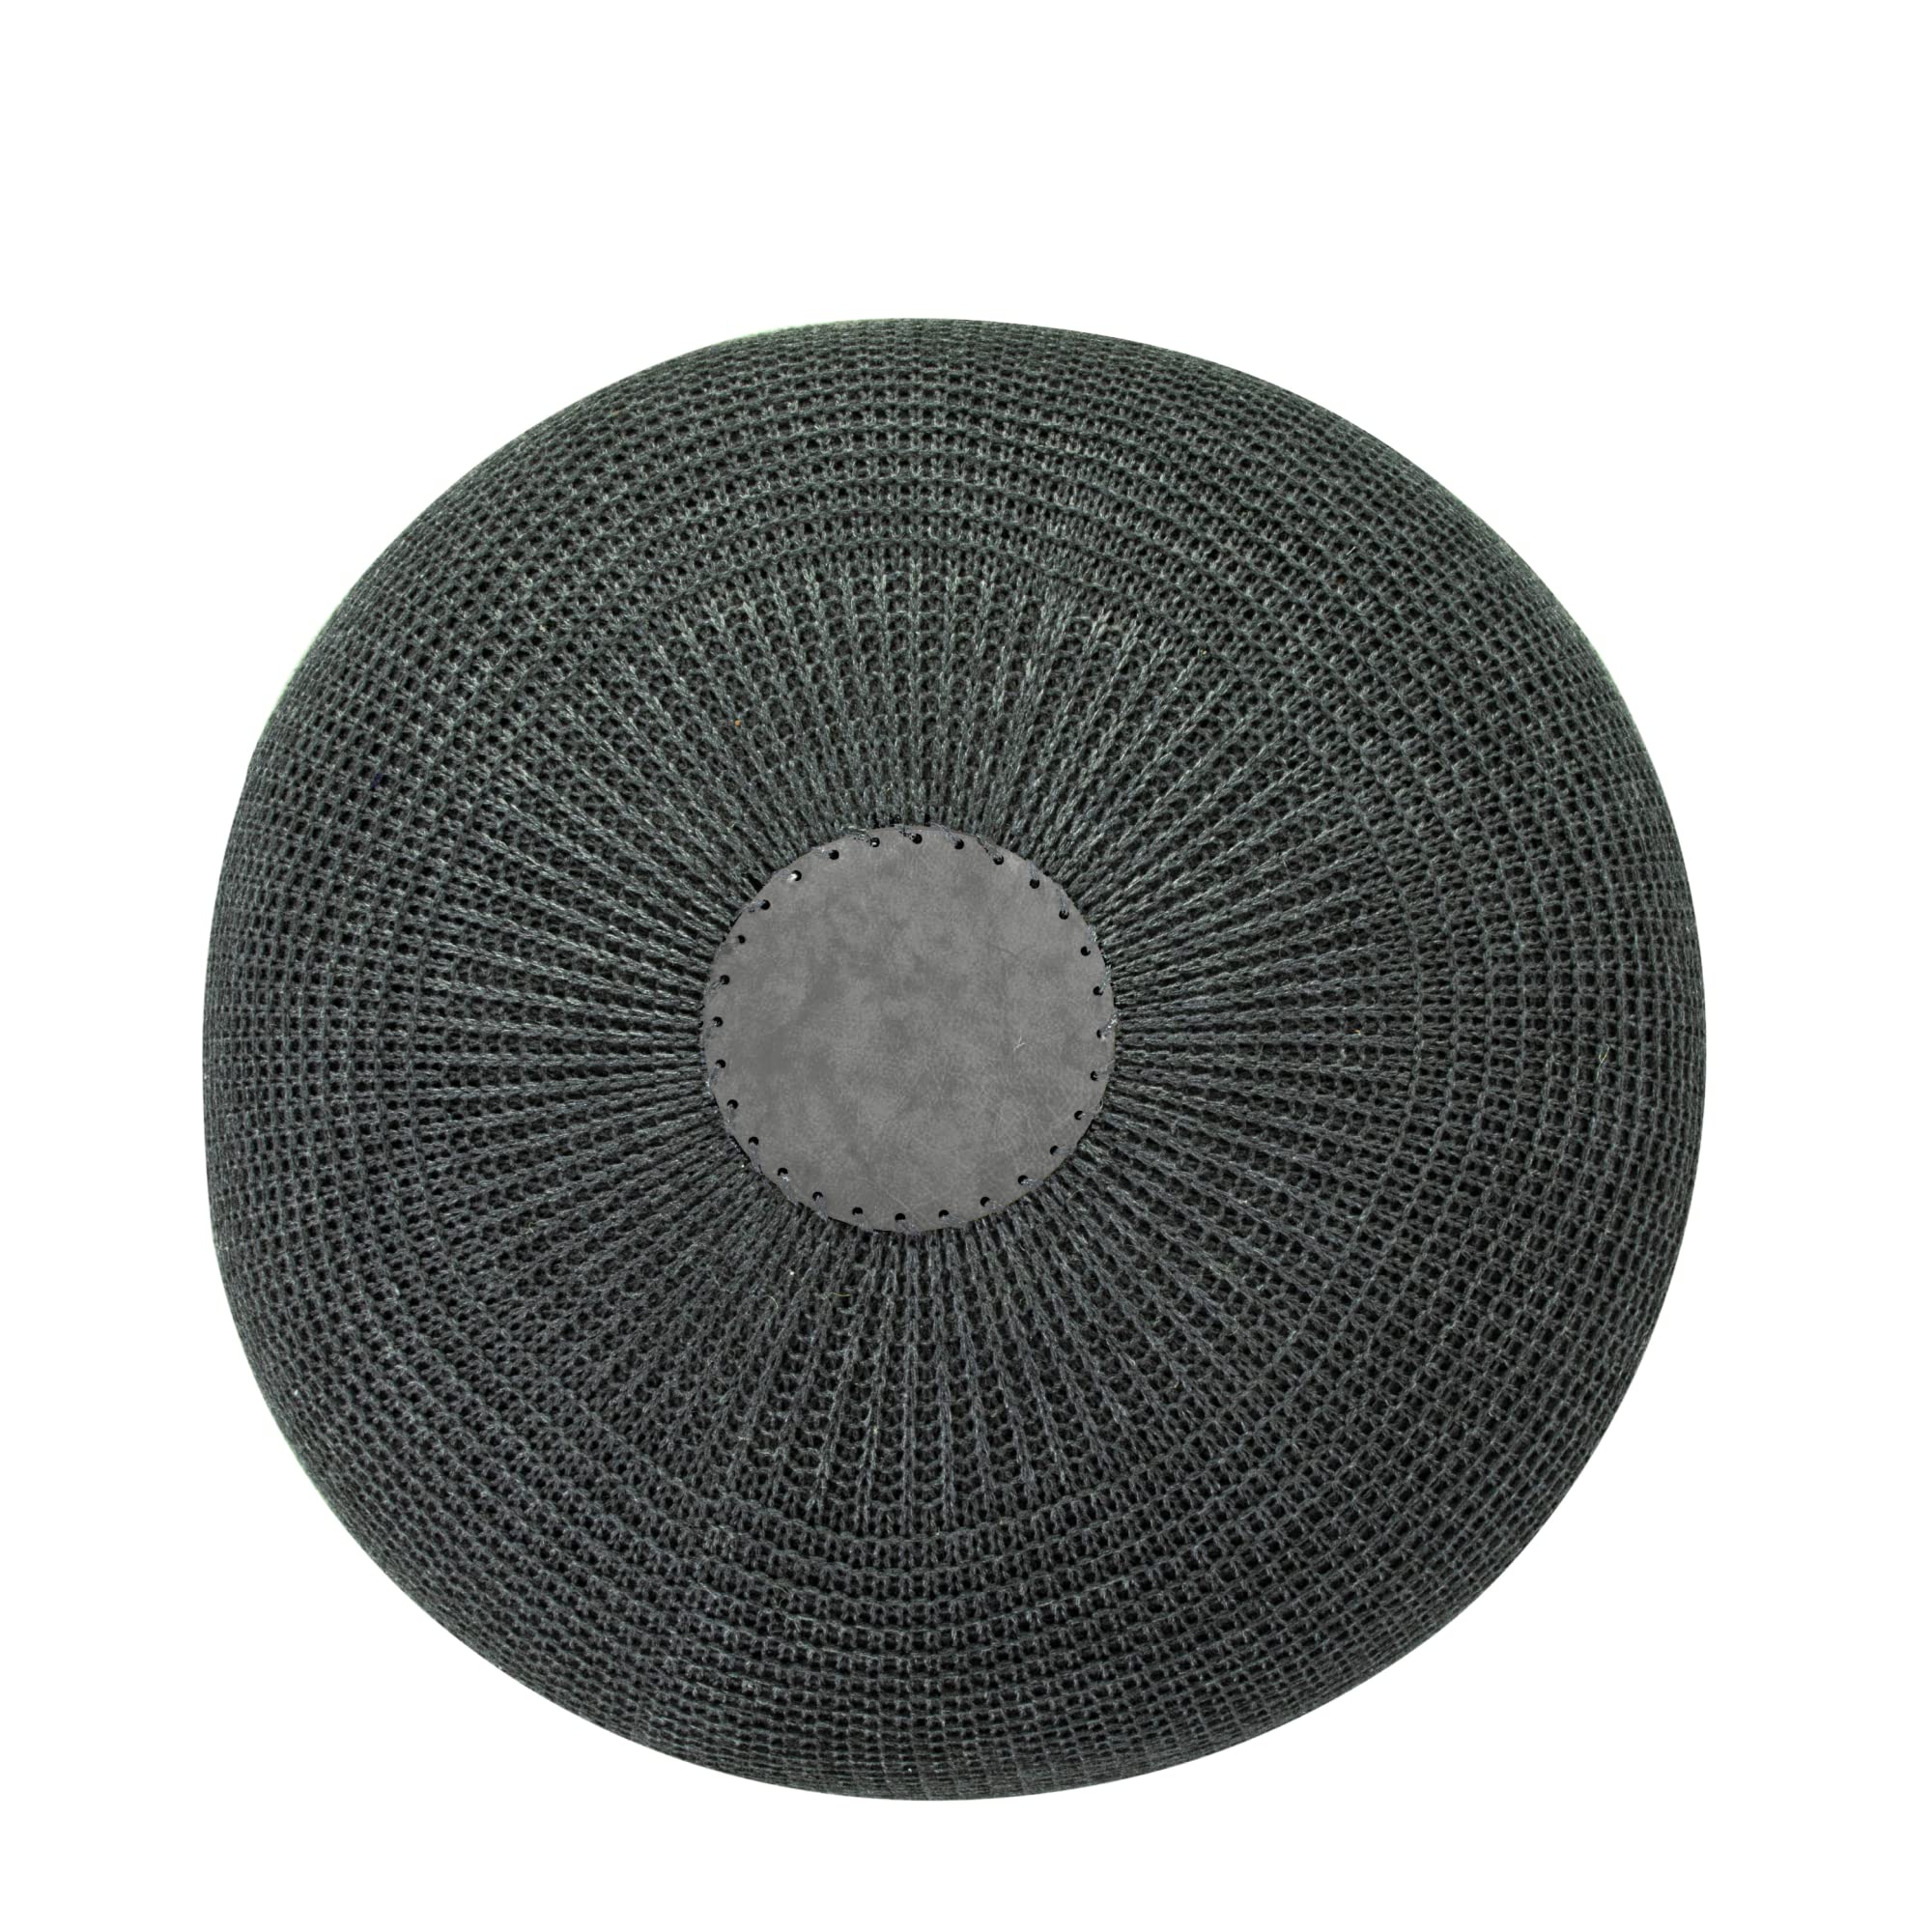 English Home Round Ottoman Pouf Footstool Knitted Pouffe Stool Seat Cushion Boho Home Decor Extra Seating Floor Cushion for Living Room, Bedroom, Indoor, Outdoor 37 x 50 cm Anthracite - image 4 of 6